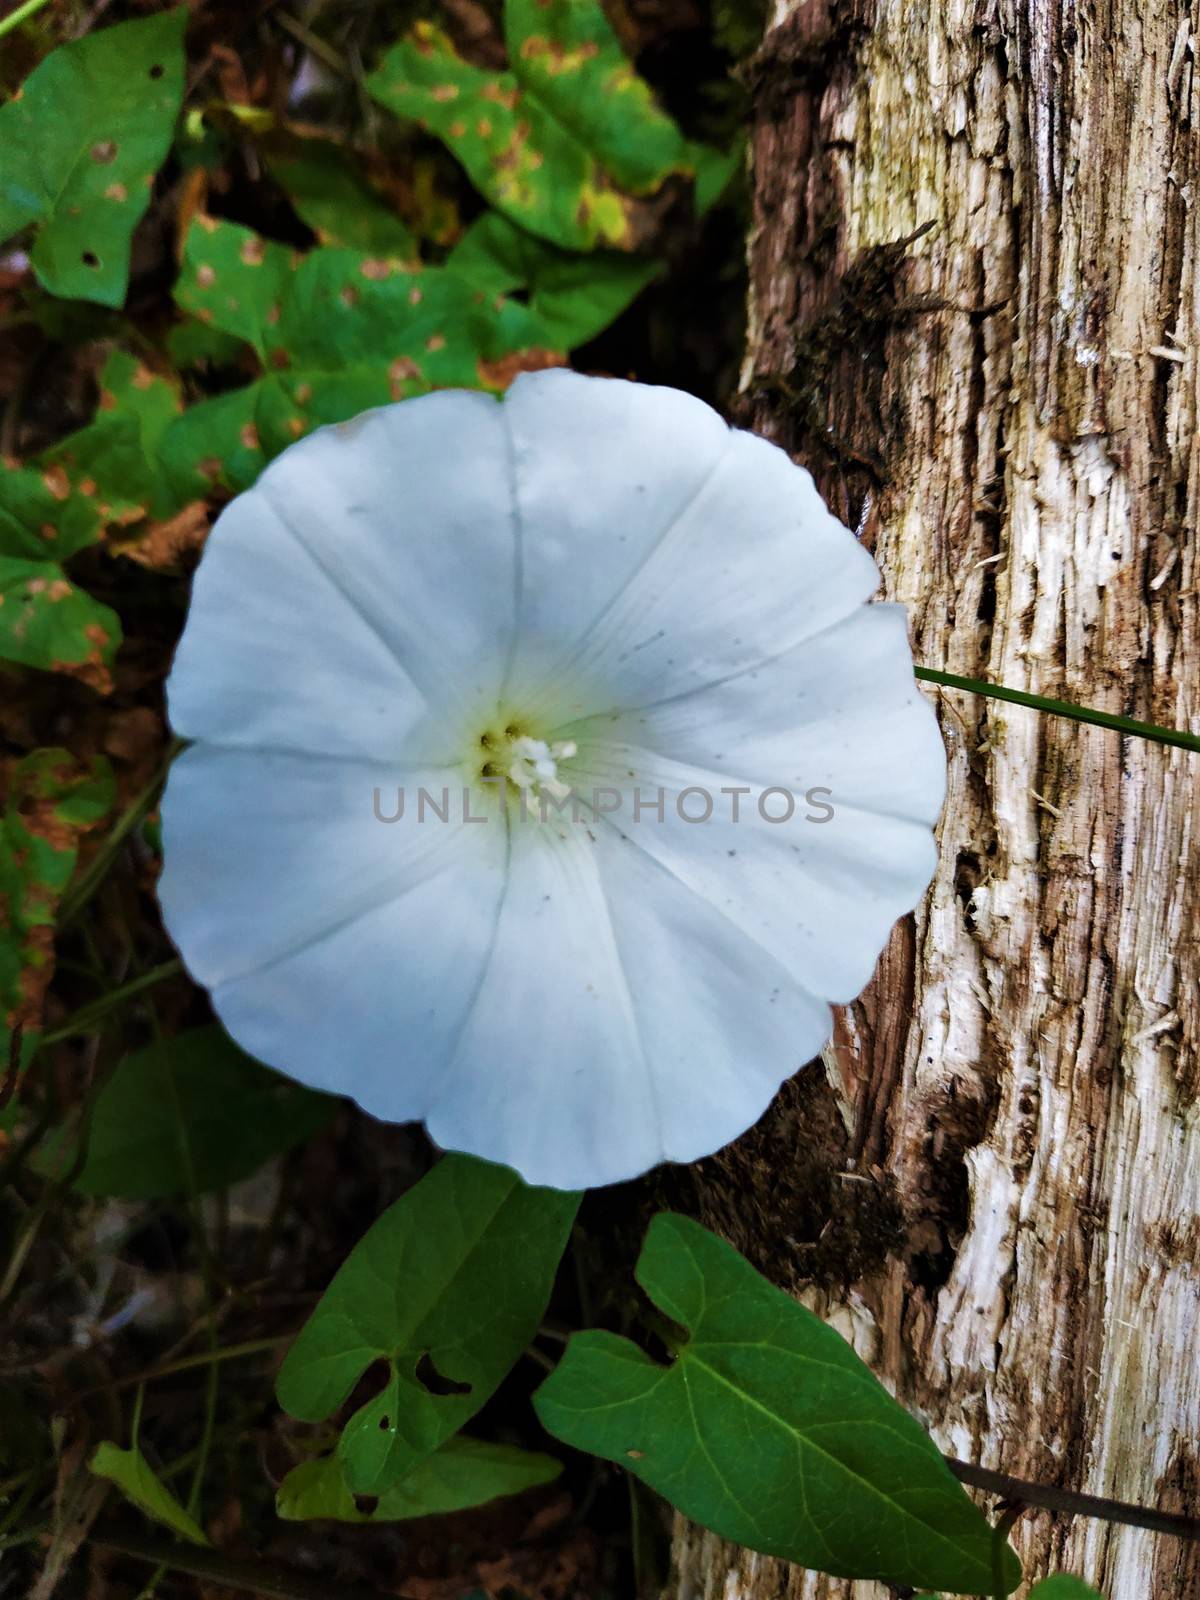 Beautiful white blossom of nidentified species of moonflower or morning glory